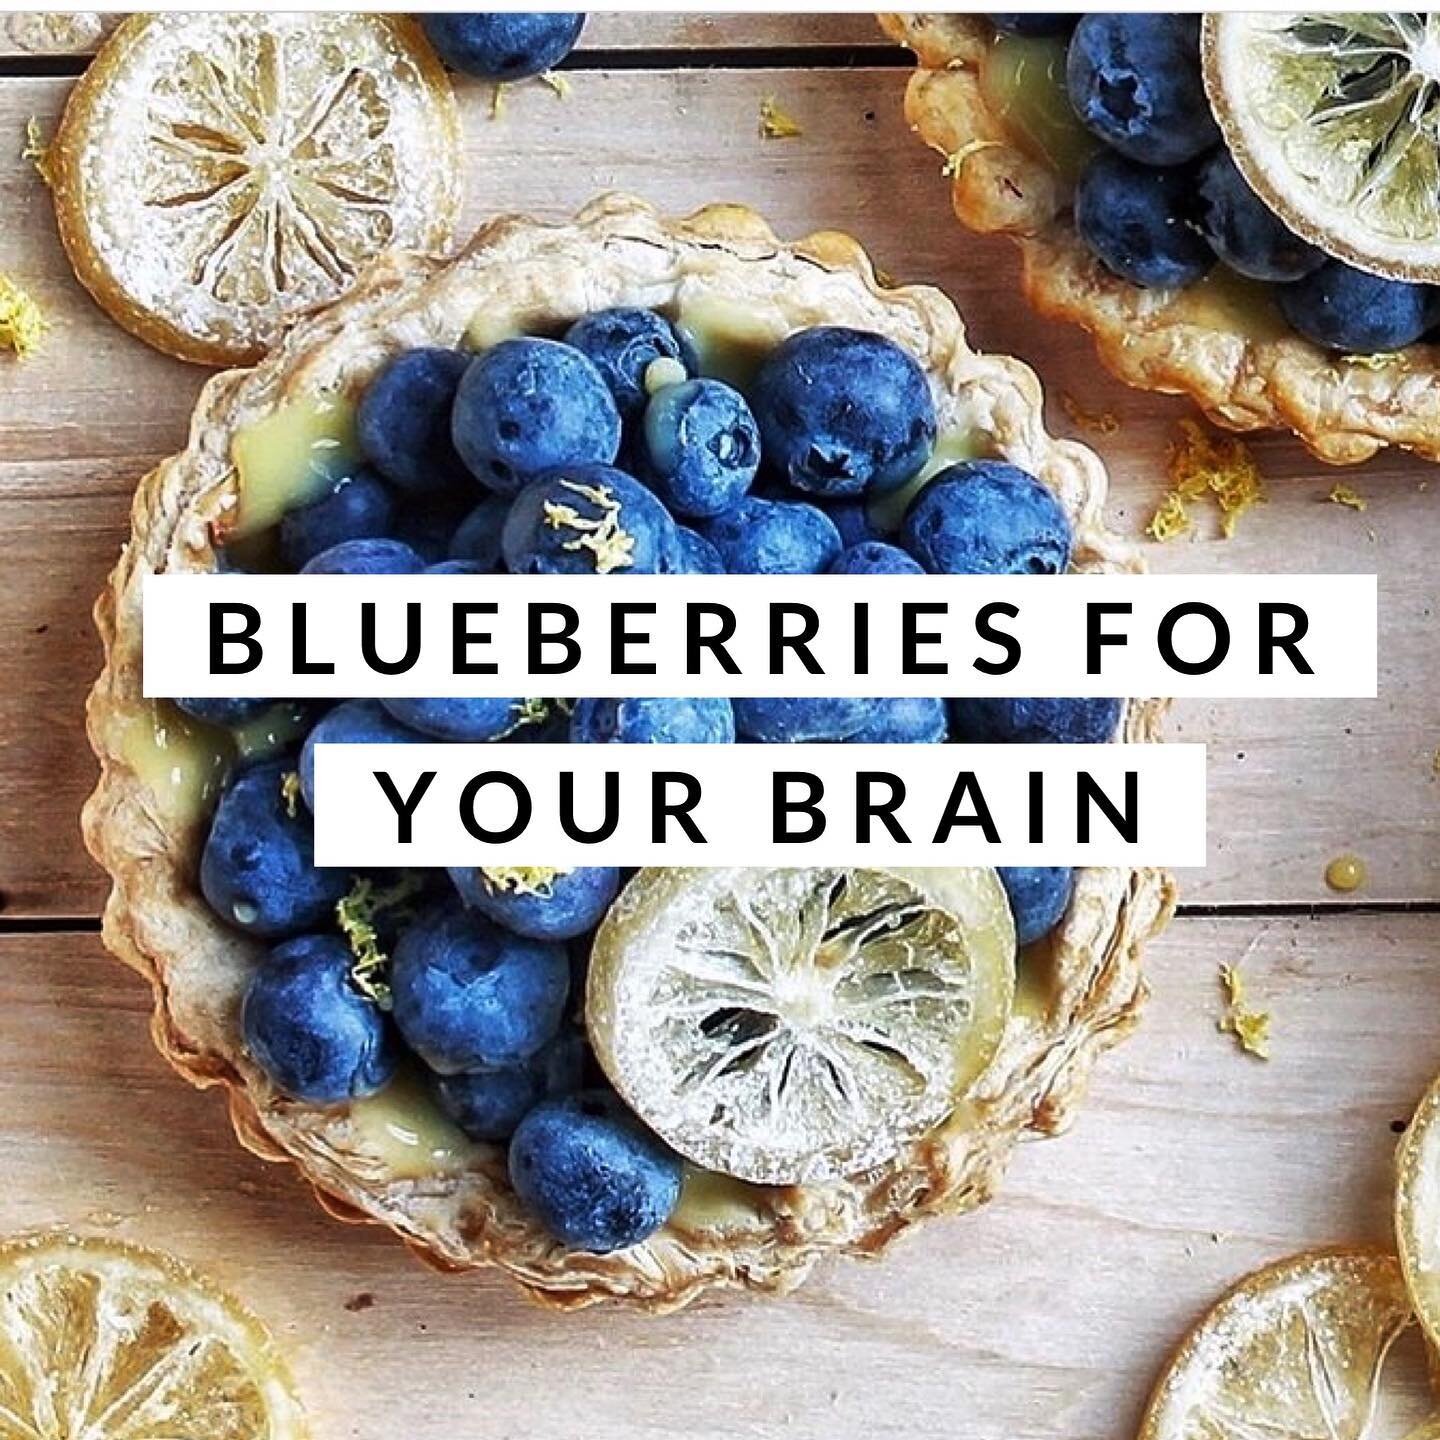 ✨Blueberries are your brains best friend✨.
.
Rich in vitamin K, vitamin C, manganese, anthrocyanins, caffeic acid, tannins, quercetin, resveratrol, fibre, polyphenols etc. .
.
🧠 Why are these good for the brain? .
.
🔥 They reduce vascular inflammat